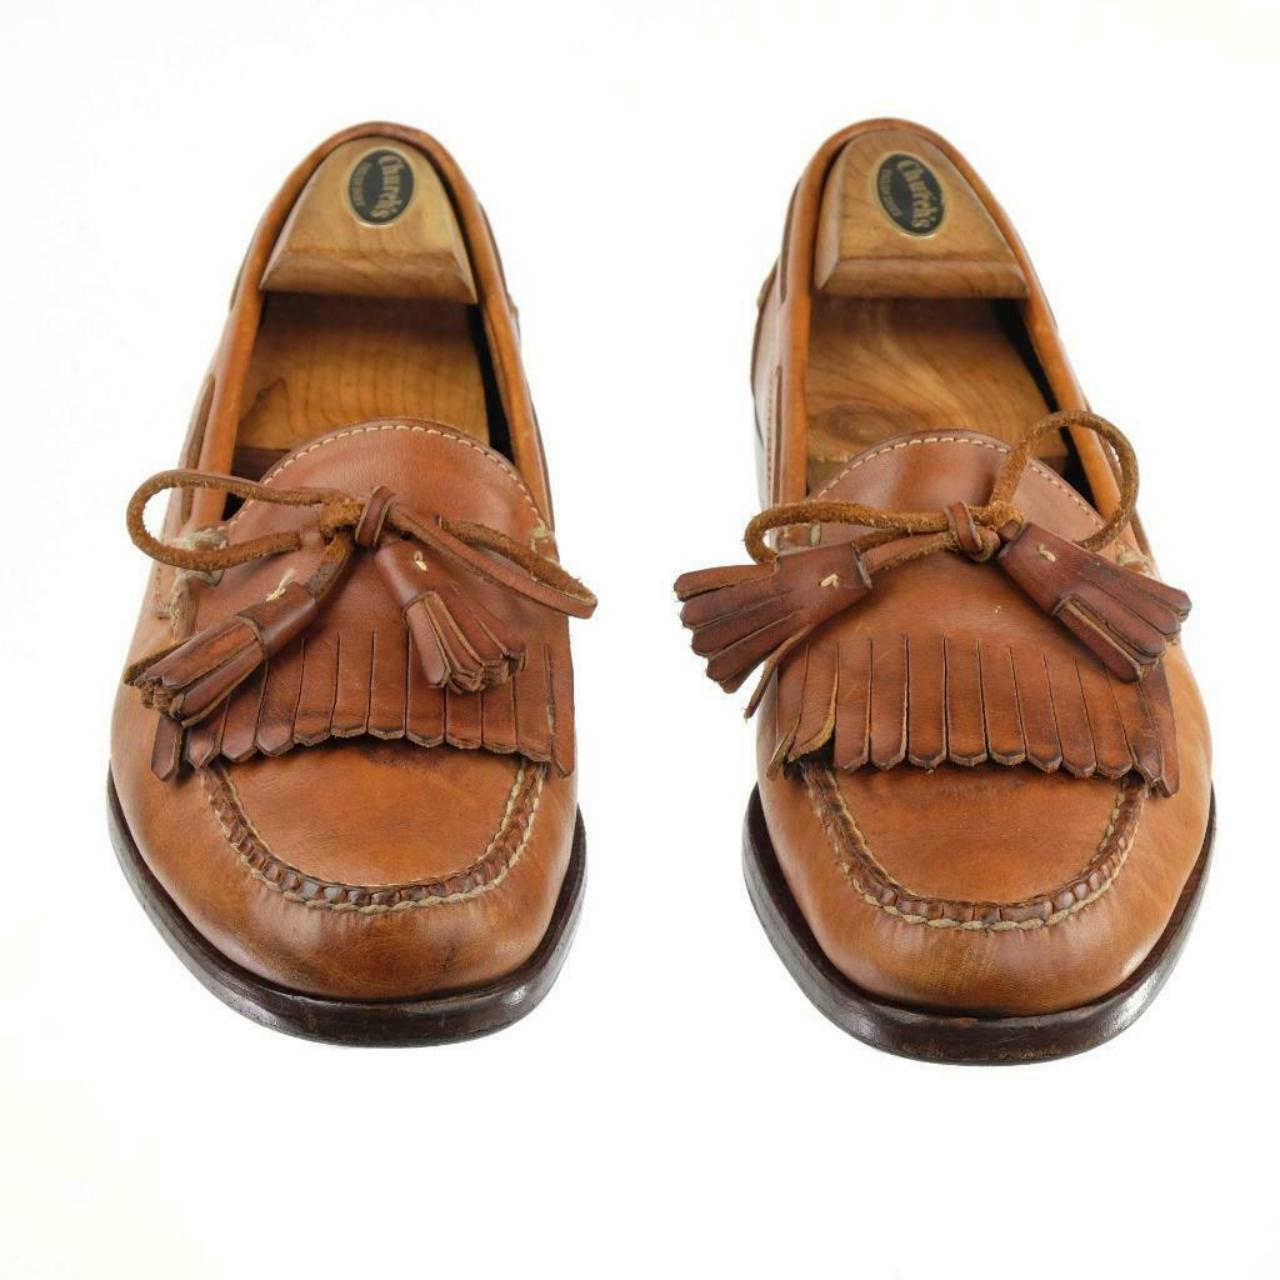 COLE HAAN COUNTRY moccasin tassel loafers. Size 10 B... - Depop